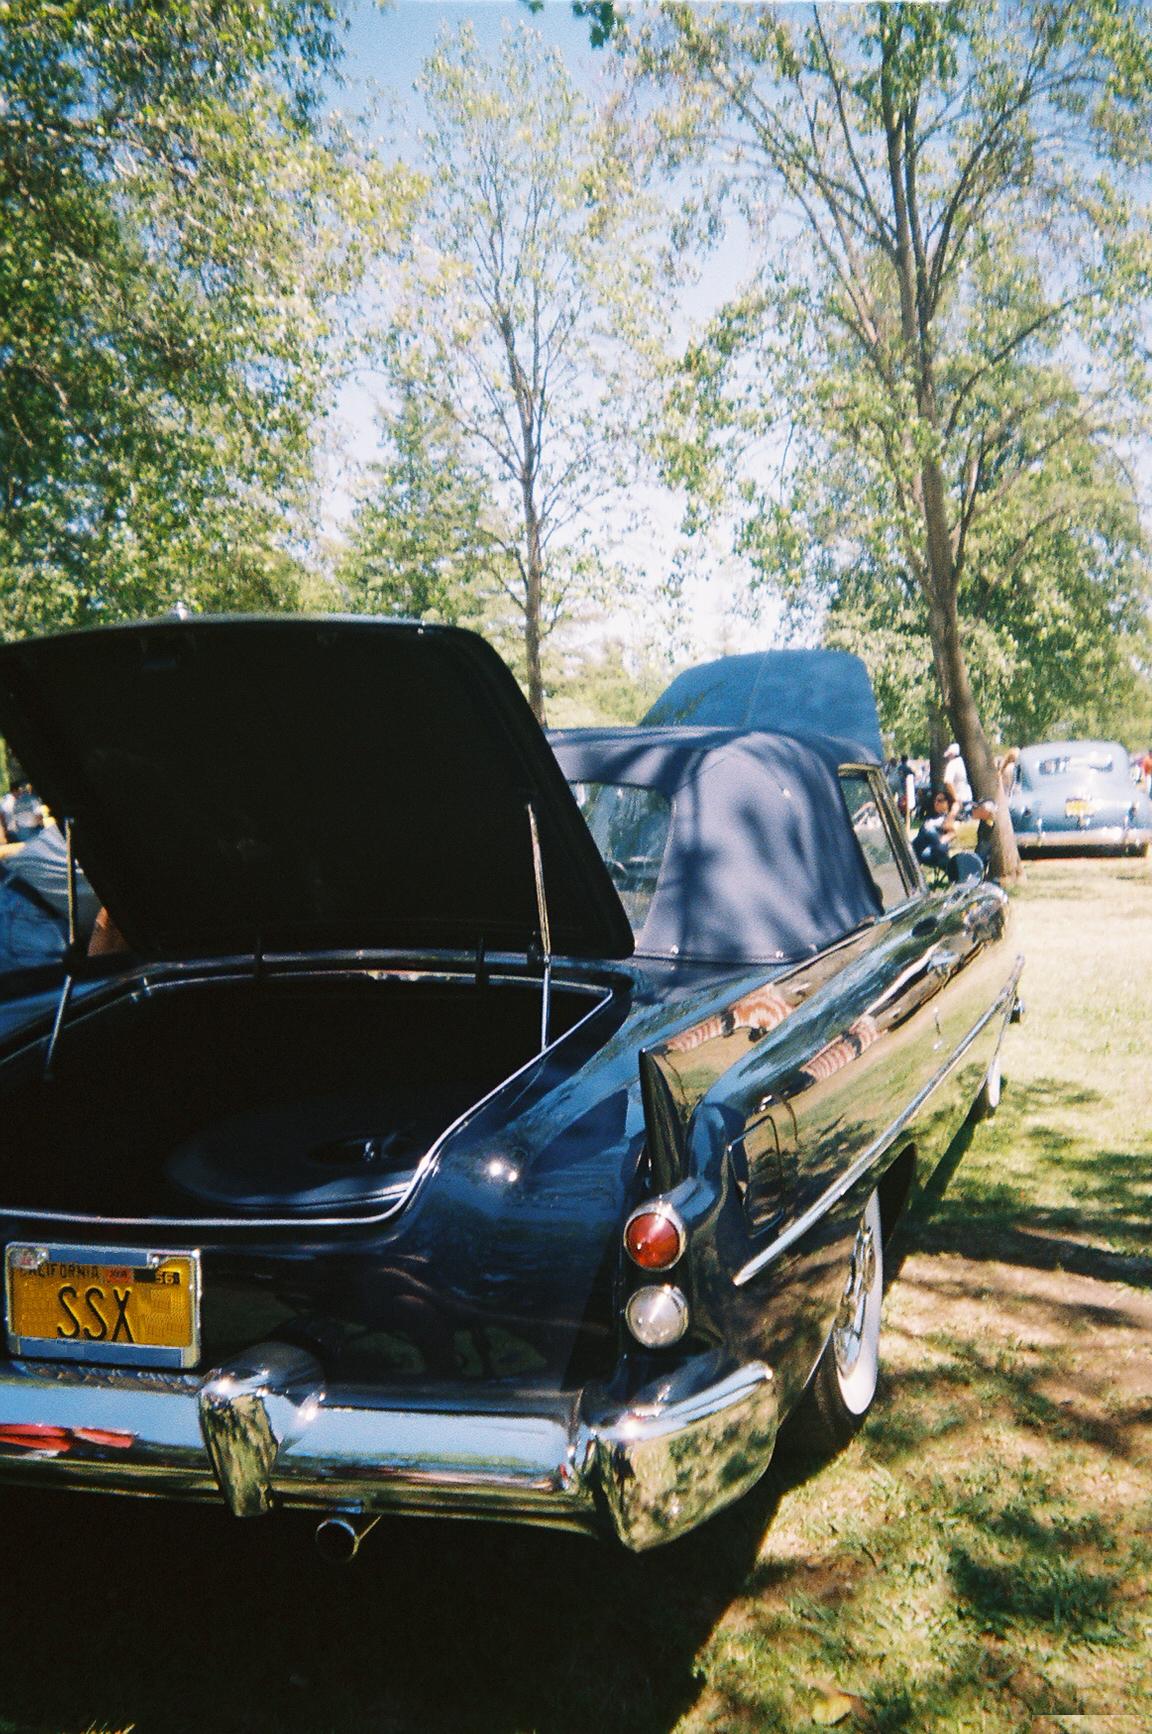 SSX Rat: Hollywood Fave - 1957 Dual Ghia/Chrysler | Flickr - Photo ...